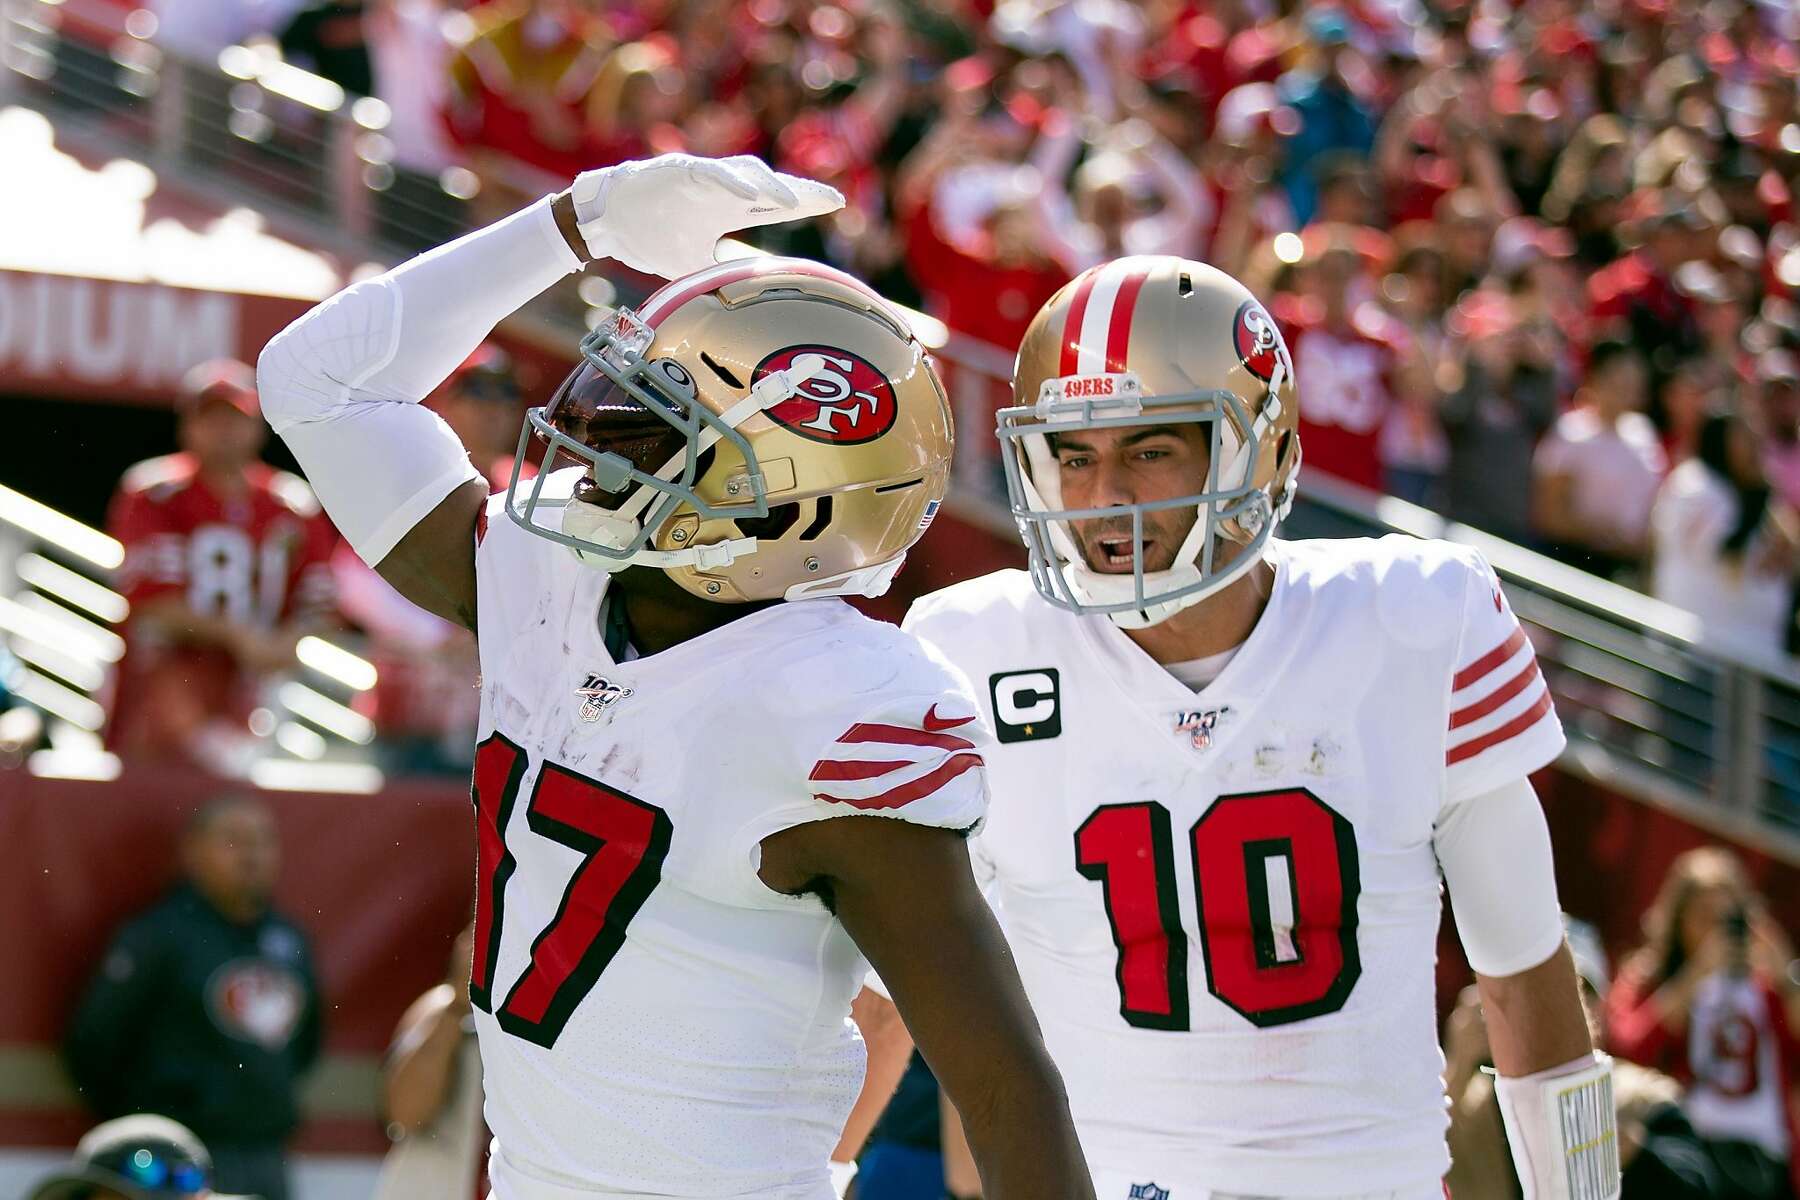 Sanders Debut With 49ers Includes A Simple Score